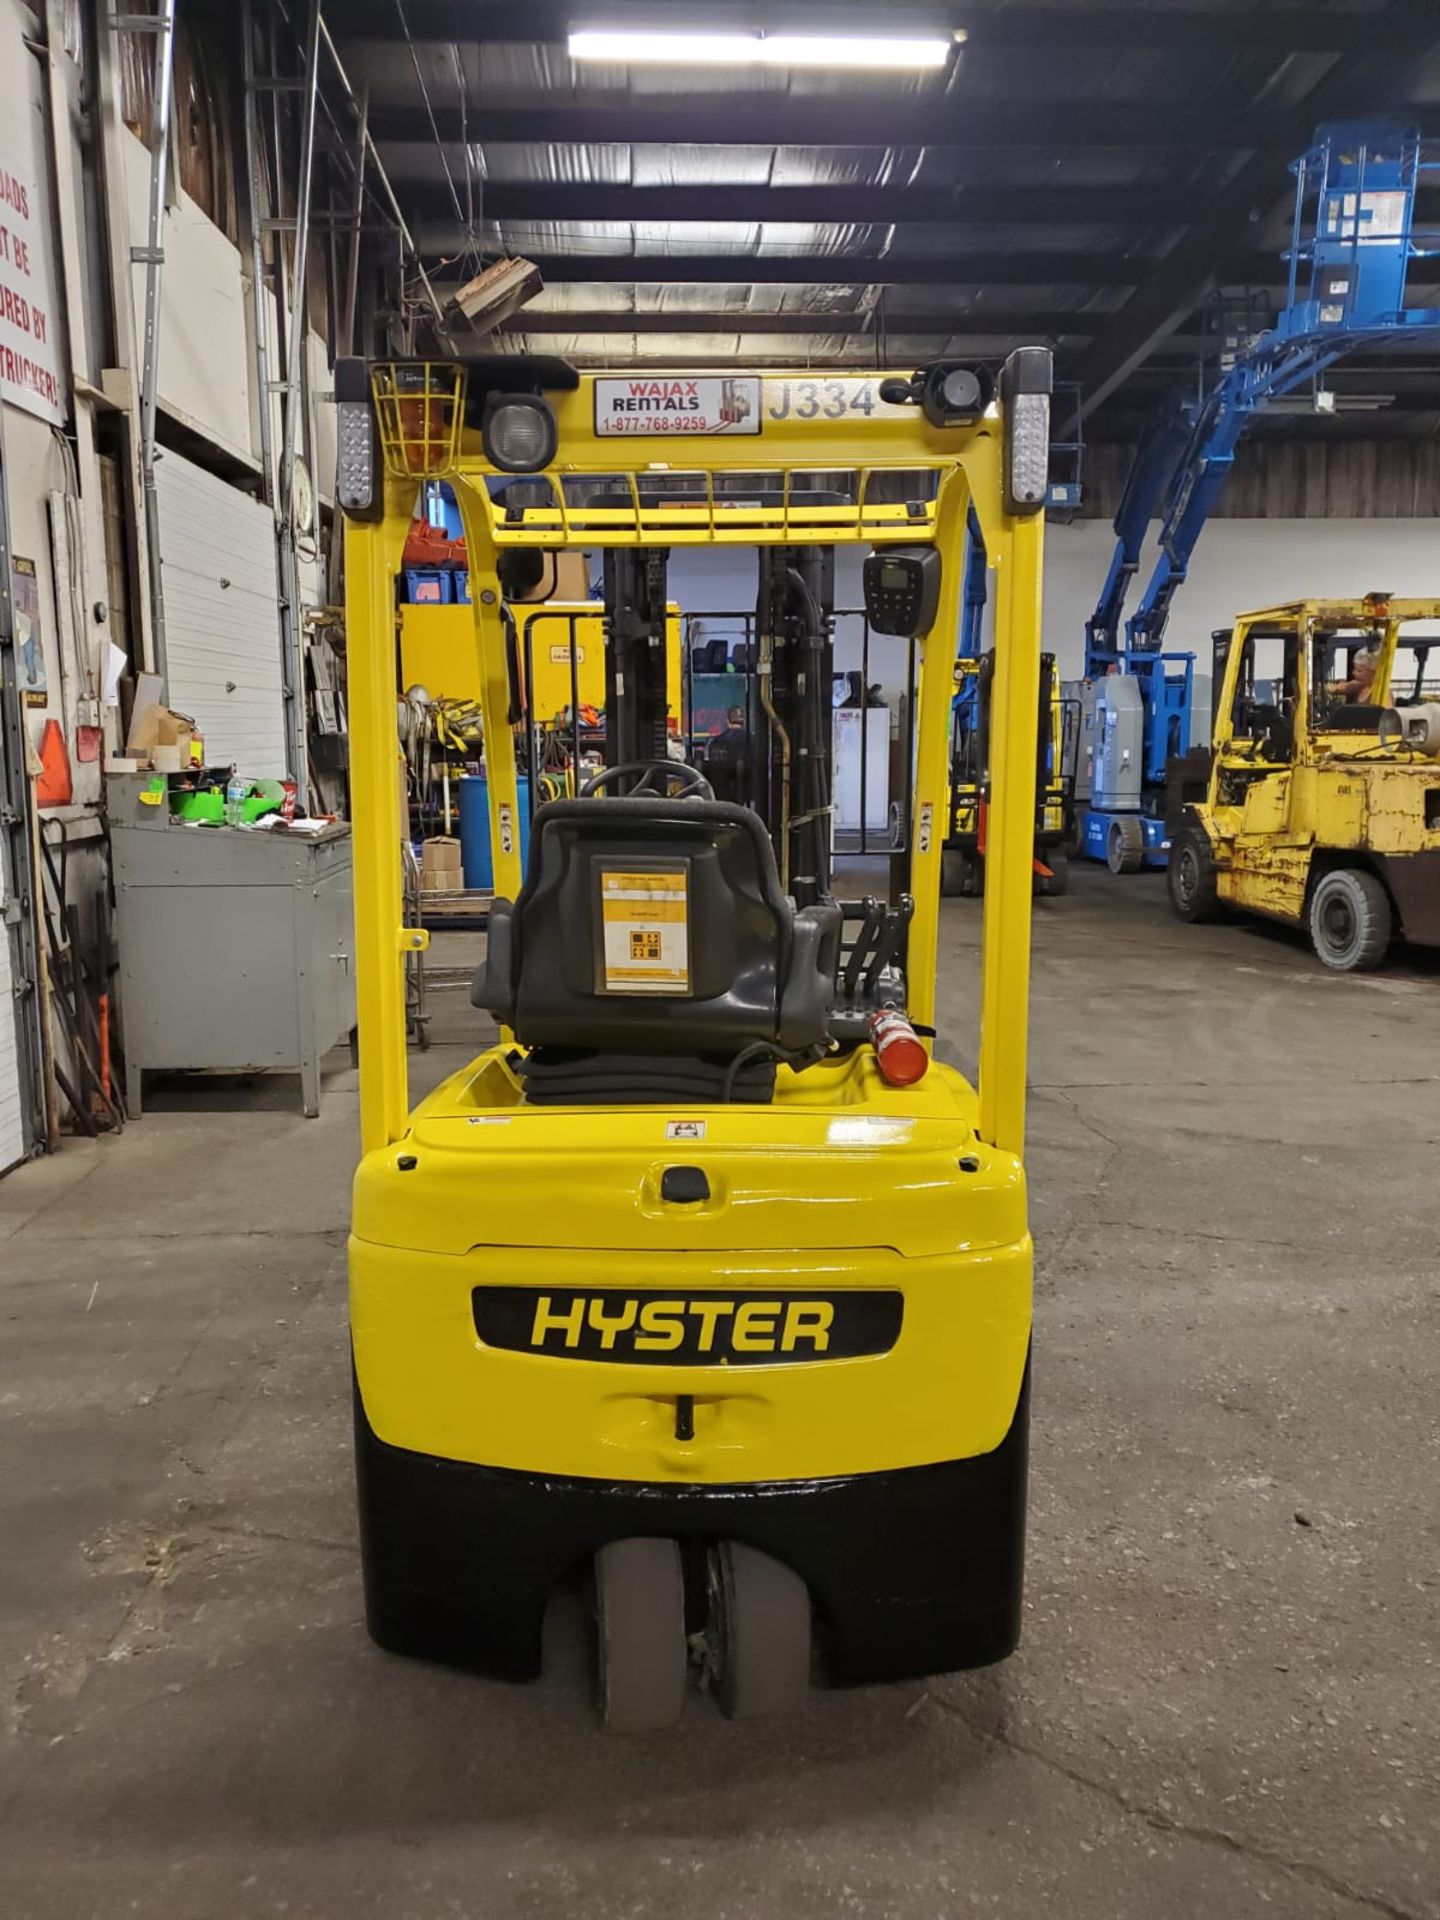 2011 Hyster 3000lbs Electric Forklift with sideshift 3-wheel unit - Image 3 of 3